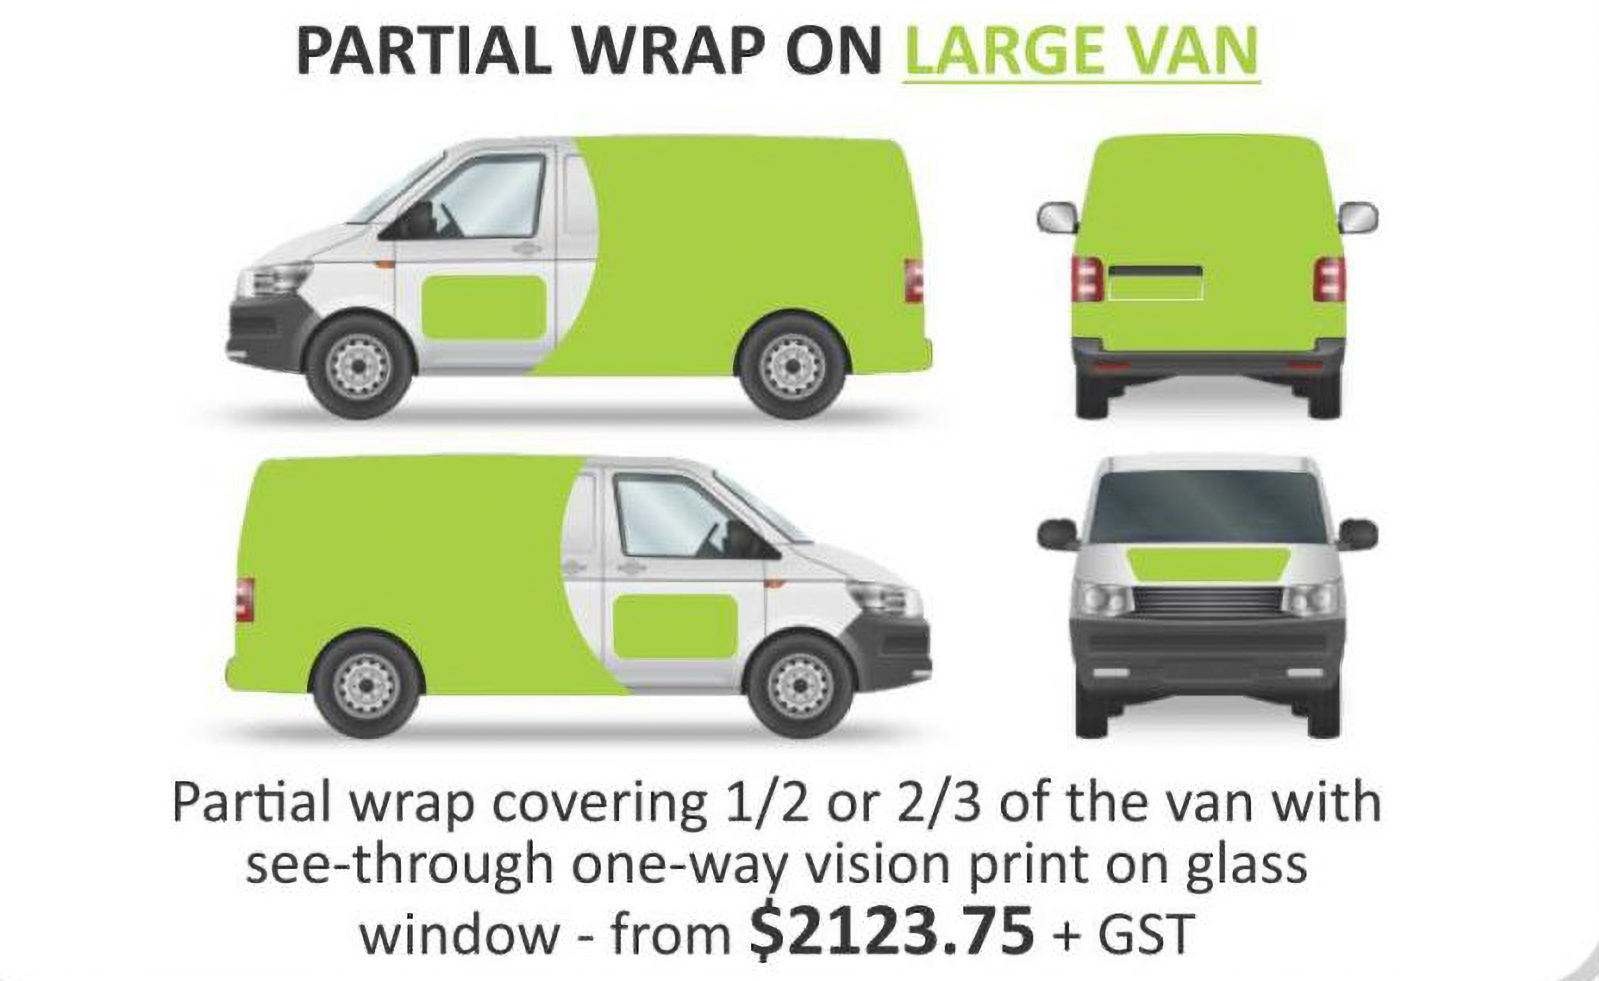 Partial wrap vehicle signage pricing for large van in Newcastle